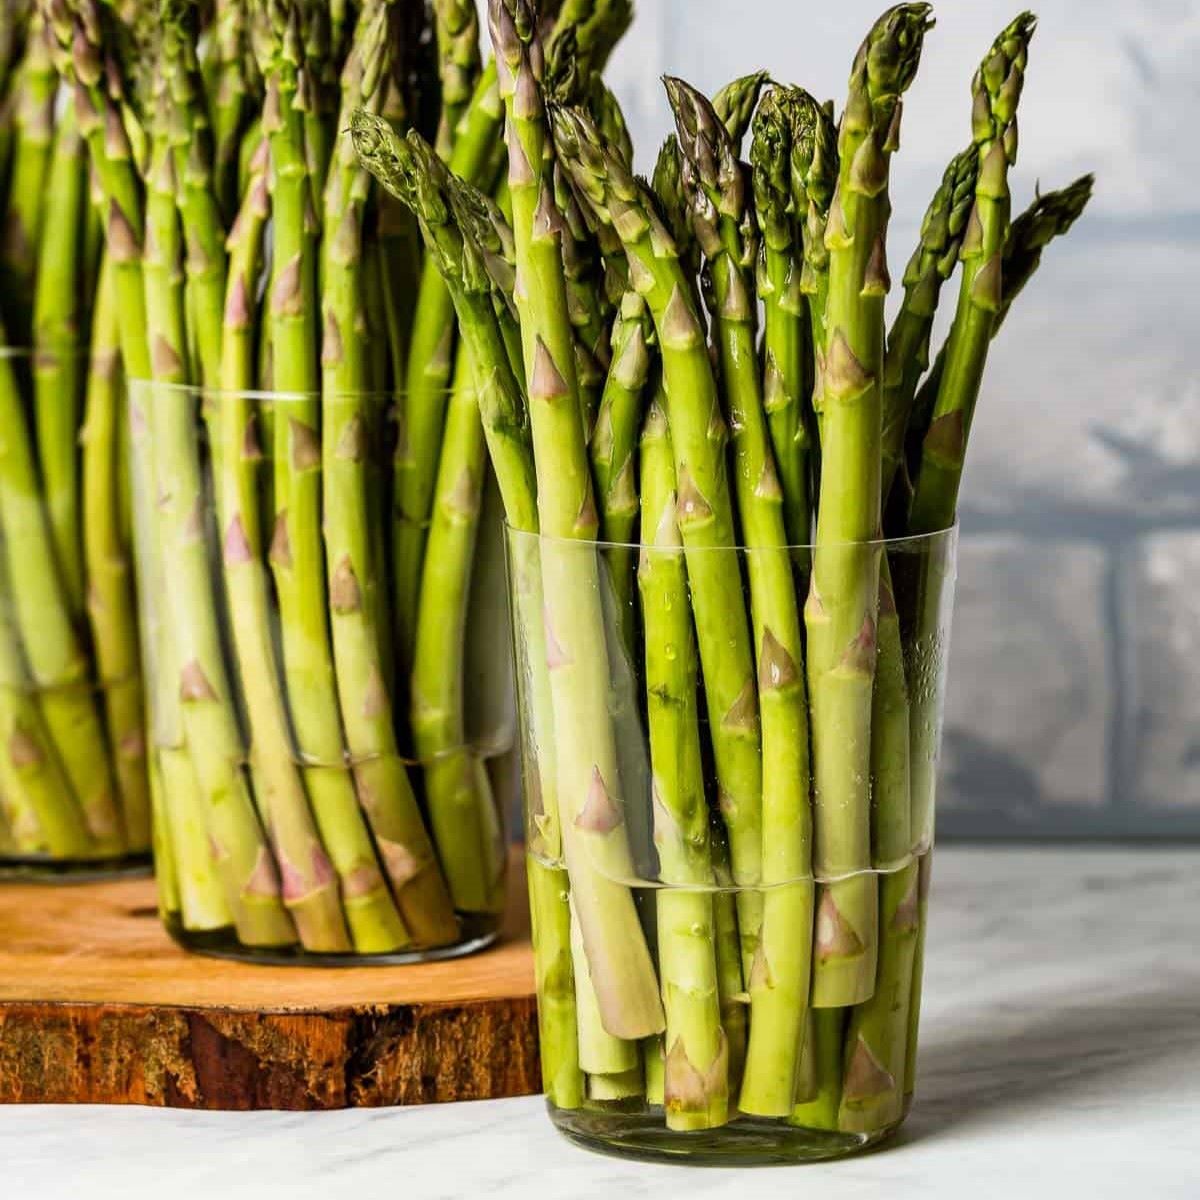 How To Store Fresh Asparagus